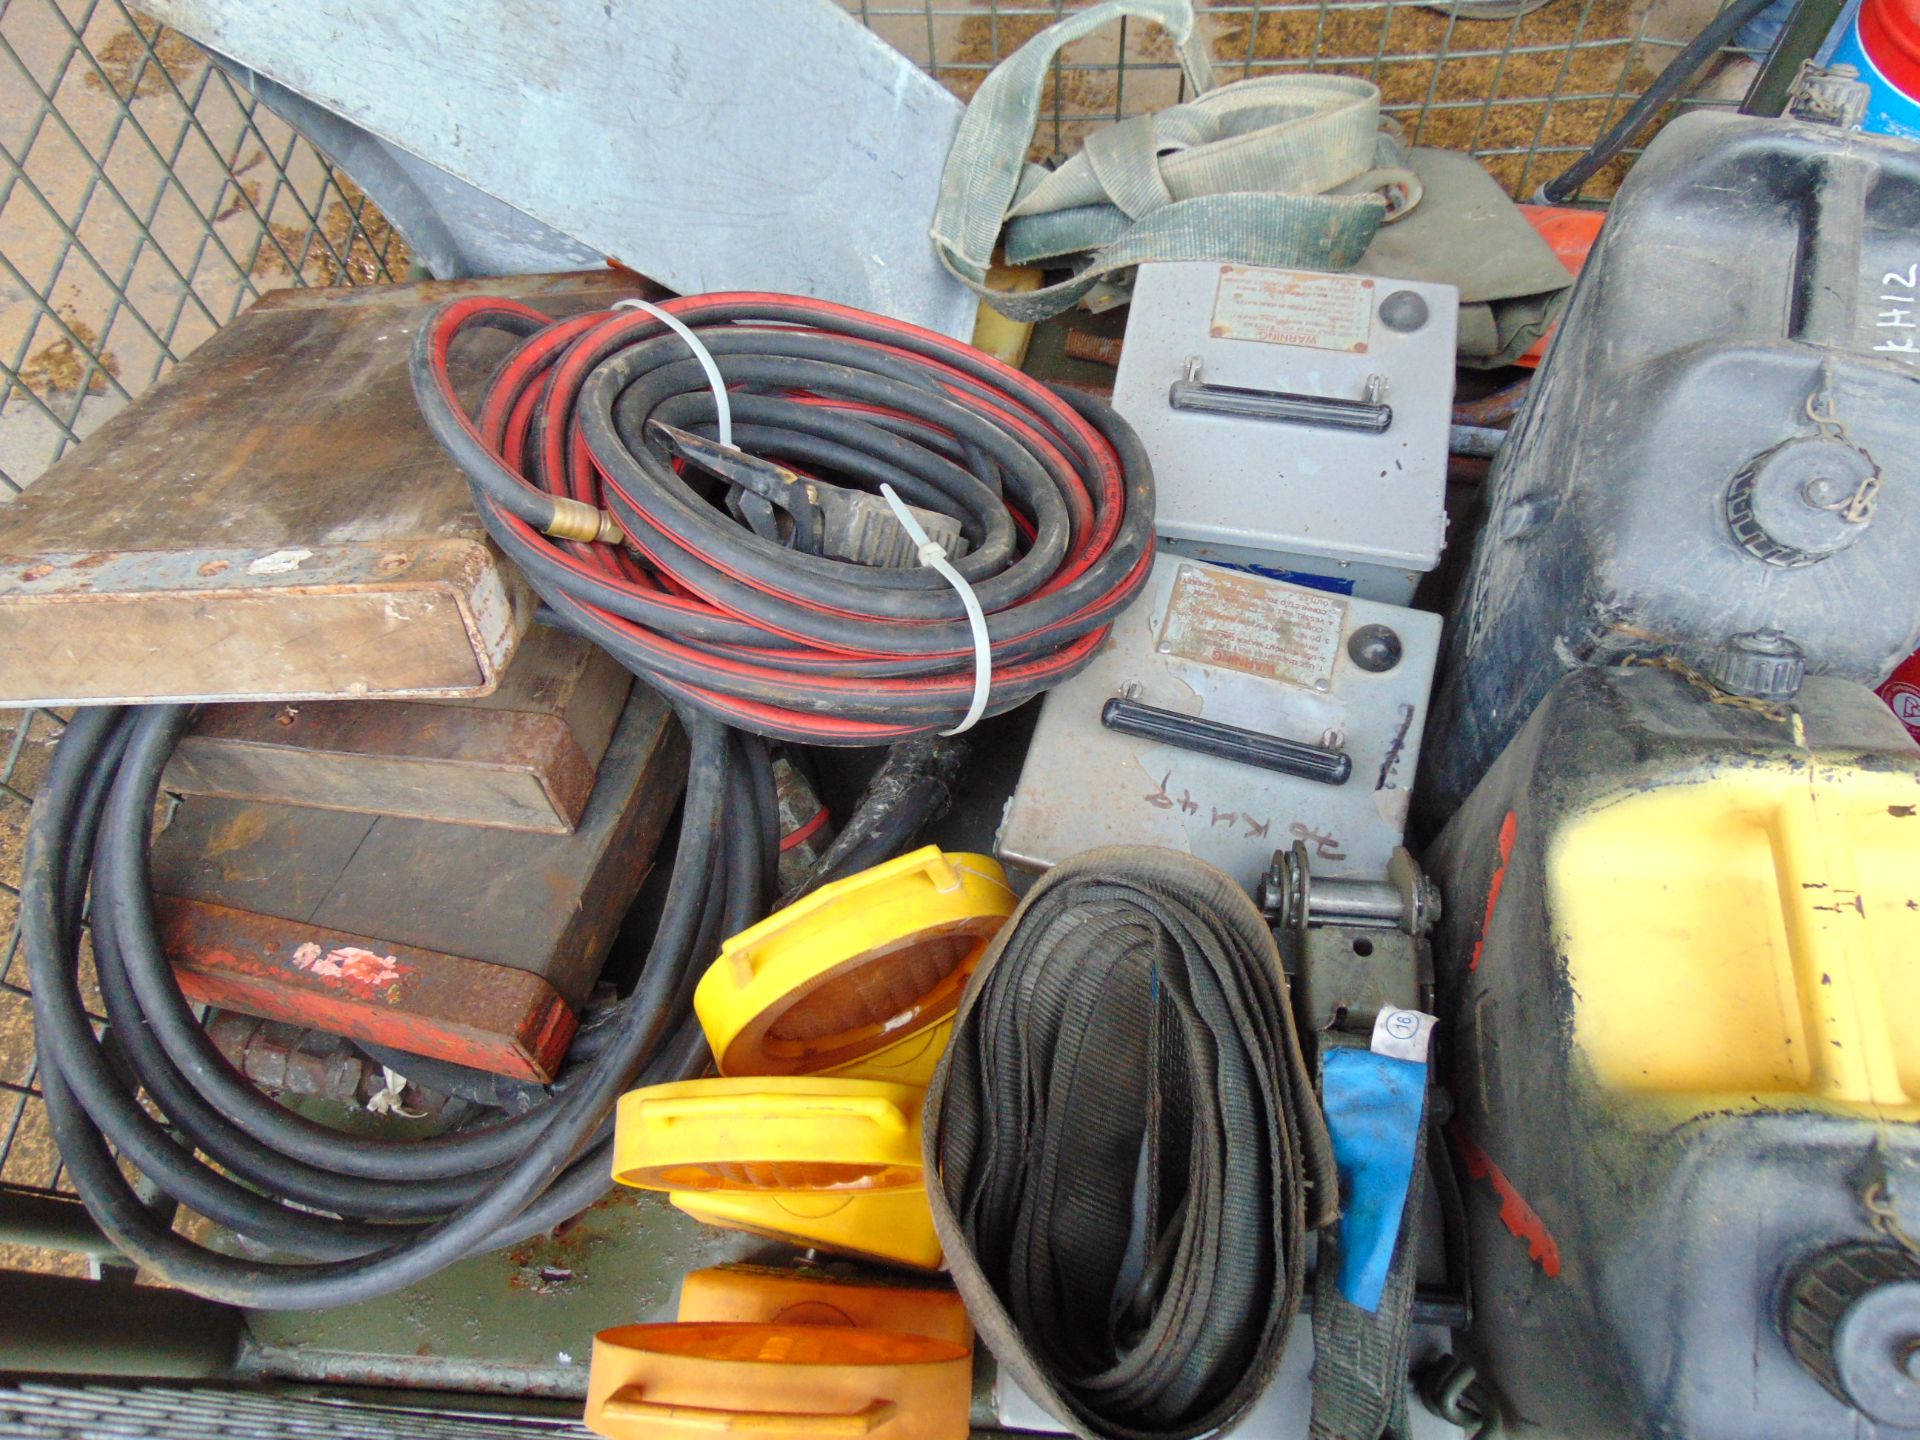 1 x Stillage Air Lines Wheel Chocks, Jerry Cans, Cooking Vessels, Ratchet Straps, Fire Extinguisher - Image 3 of 6